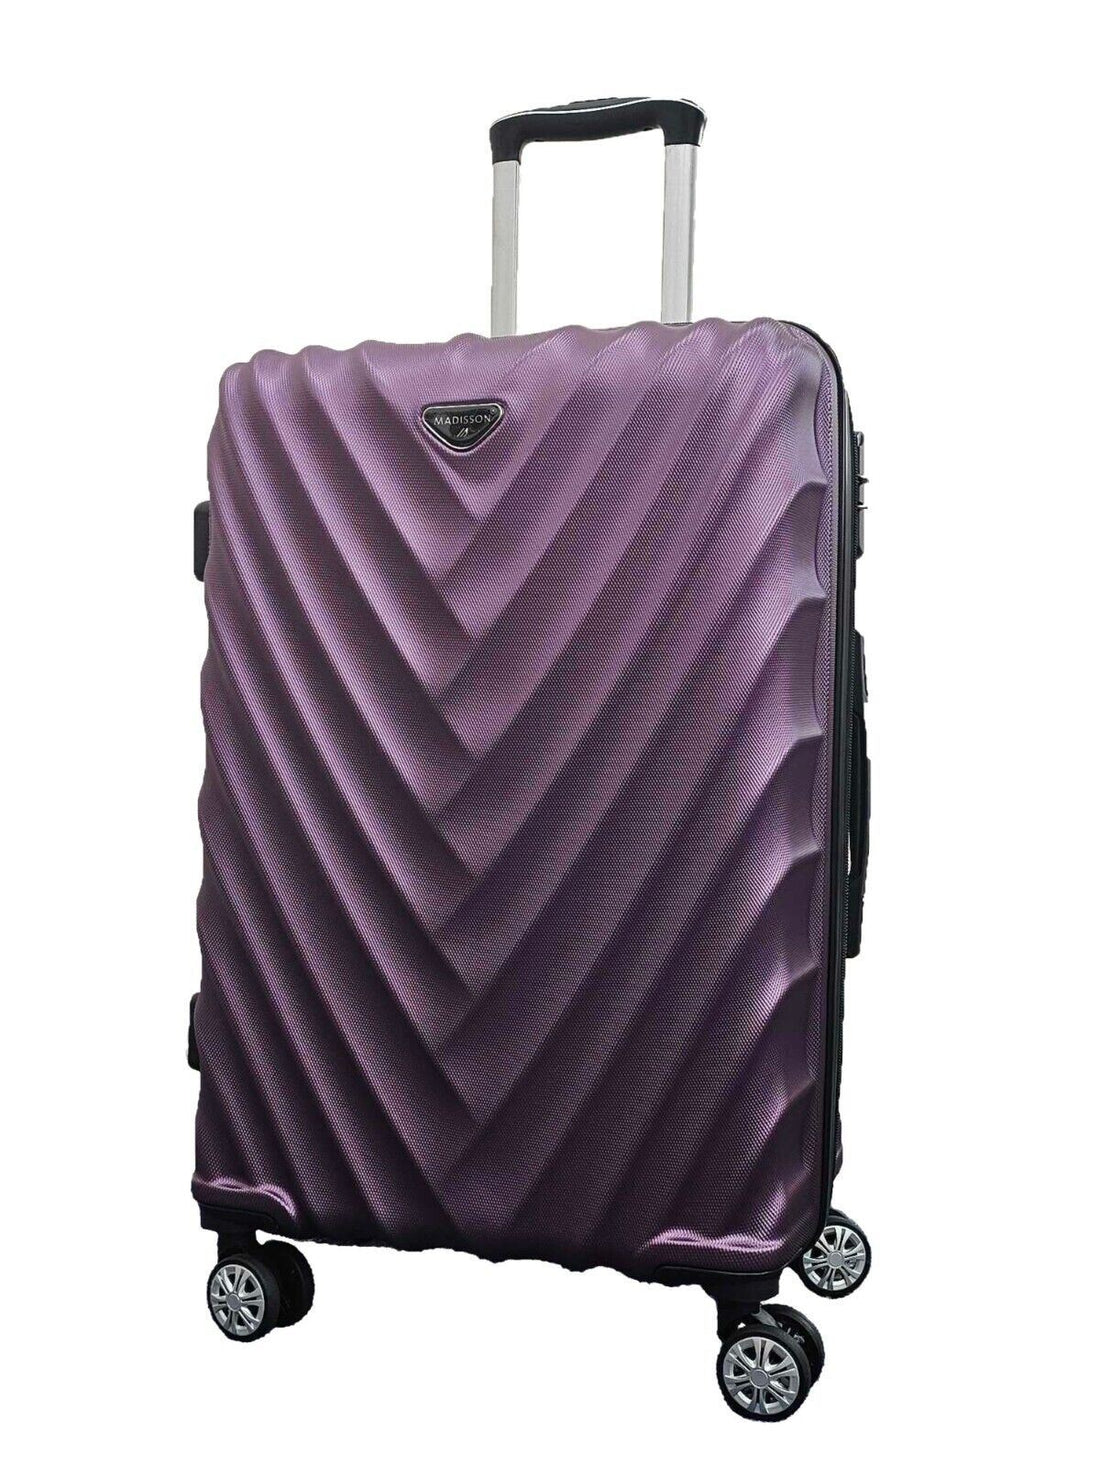 Chatom Large Hard Shell Suitcase in Purple